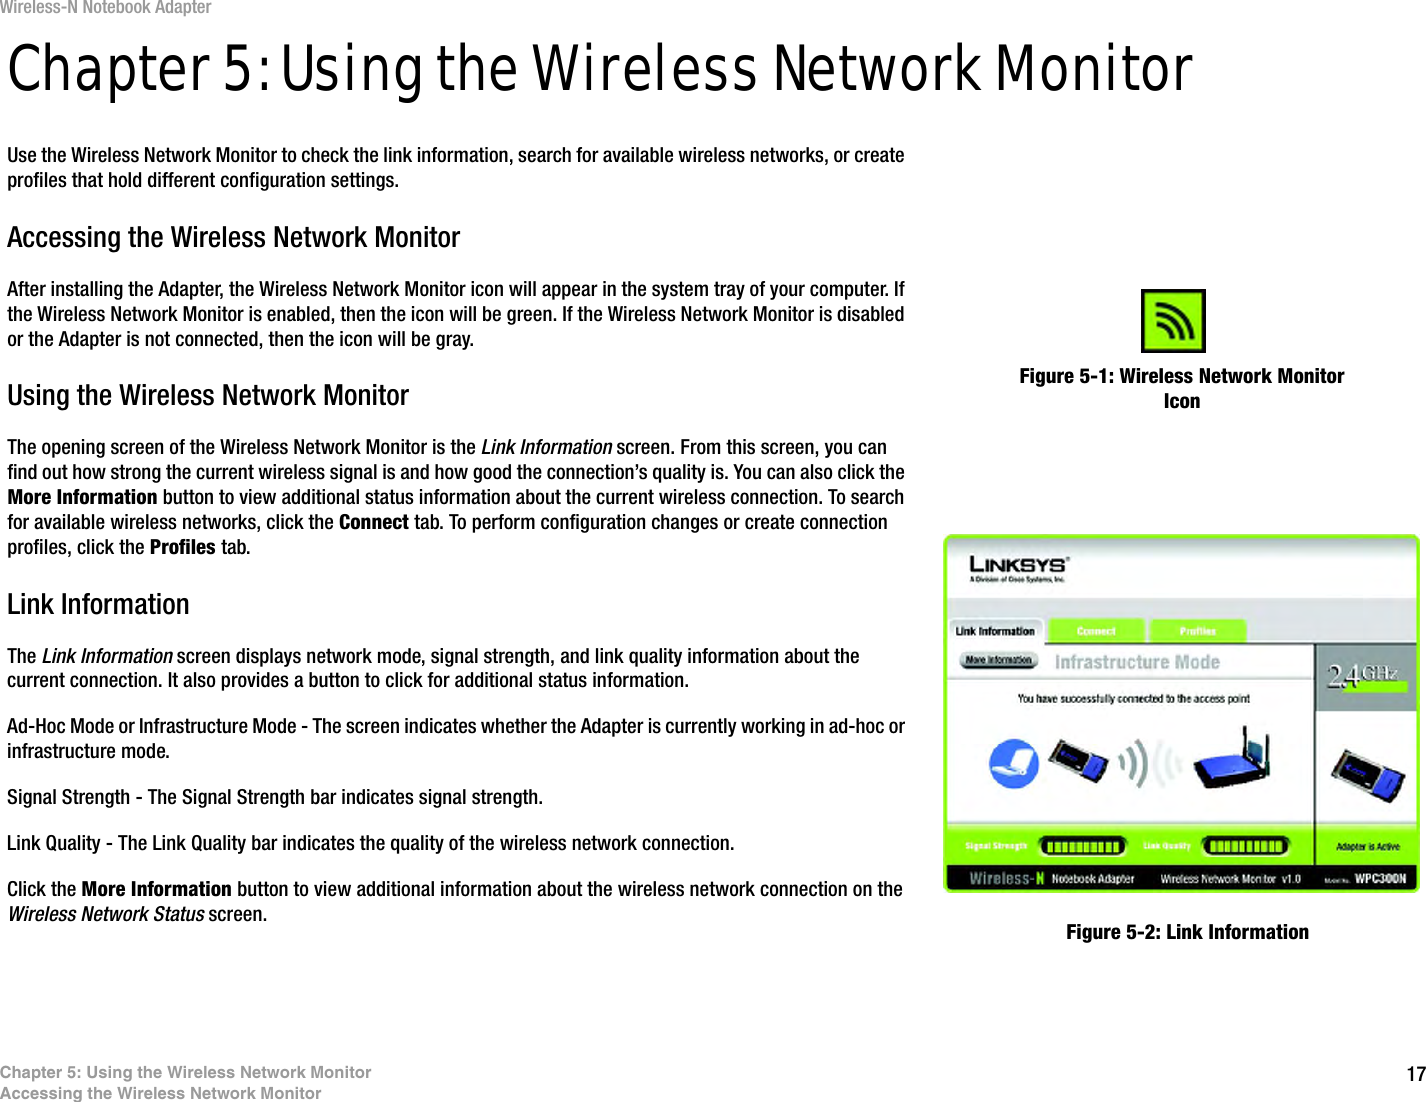 17Chapter 5: Using the Wireless Network MonitorAccessing the Wireless Network MonitorWireless-N Notebook AdapterChapter 5: Using the Wireless Network MonitorUse the Wireless Network Monitor to check the link information, search for available wireless networks, or create profiles that hold different configuration settings.Accessing the Wireless Network MonitorAfter installing the Adapter, the Wireless Network Monitor icon will appear in the system tray of your computer. If the Wireless Network Monitor is enabled, then the icon will be green. If the Wireless Network Monitor is disabled or the Adapter is not connected, then the icon will be gray.Using the Wireless Network MonitorThe opening screen of the Wireless Network Monitor is the Link Information screen. From this screen, you can find out how strong the current wireless signal is and how good the connection’s quality is. You can also click the More Information button to view additional status information about the current wireless connection. To search for available wireless networks, click the Connect tab. To perform configuration changes or create connection profiles, click the Profiles tab.Link InformationThe Link Information screen displays network mode, signal strength, and link quality information about the current connection. It also provides a button to click for additional status information.Ad-Hoc Mode or Infrastructure Mode - The screen indicates whether the Adapter is currently working in ad-hoc or infrastructure mode.Signal Strength - The Signal Strength bar indicates signal strength. Link Quality - The Link Quality bar indicates the quality of the wireless network connection.Click the More Information button to view additional information about the wireless network connection on the Wireless Network Status screen.Figure 5-1: Wireless Network Monitor IconFigure 5-2: Link Information